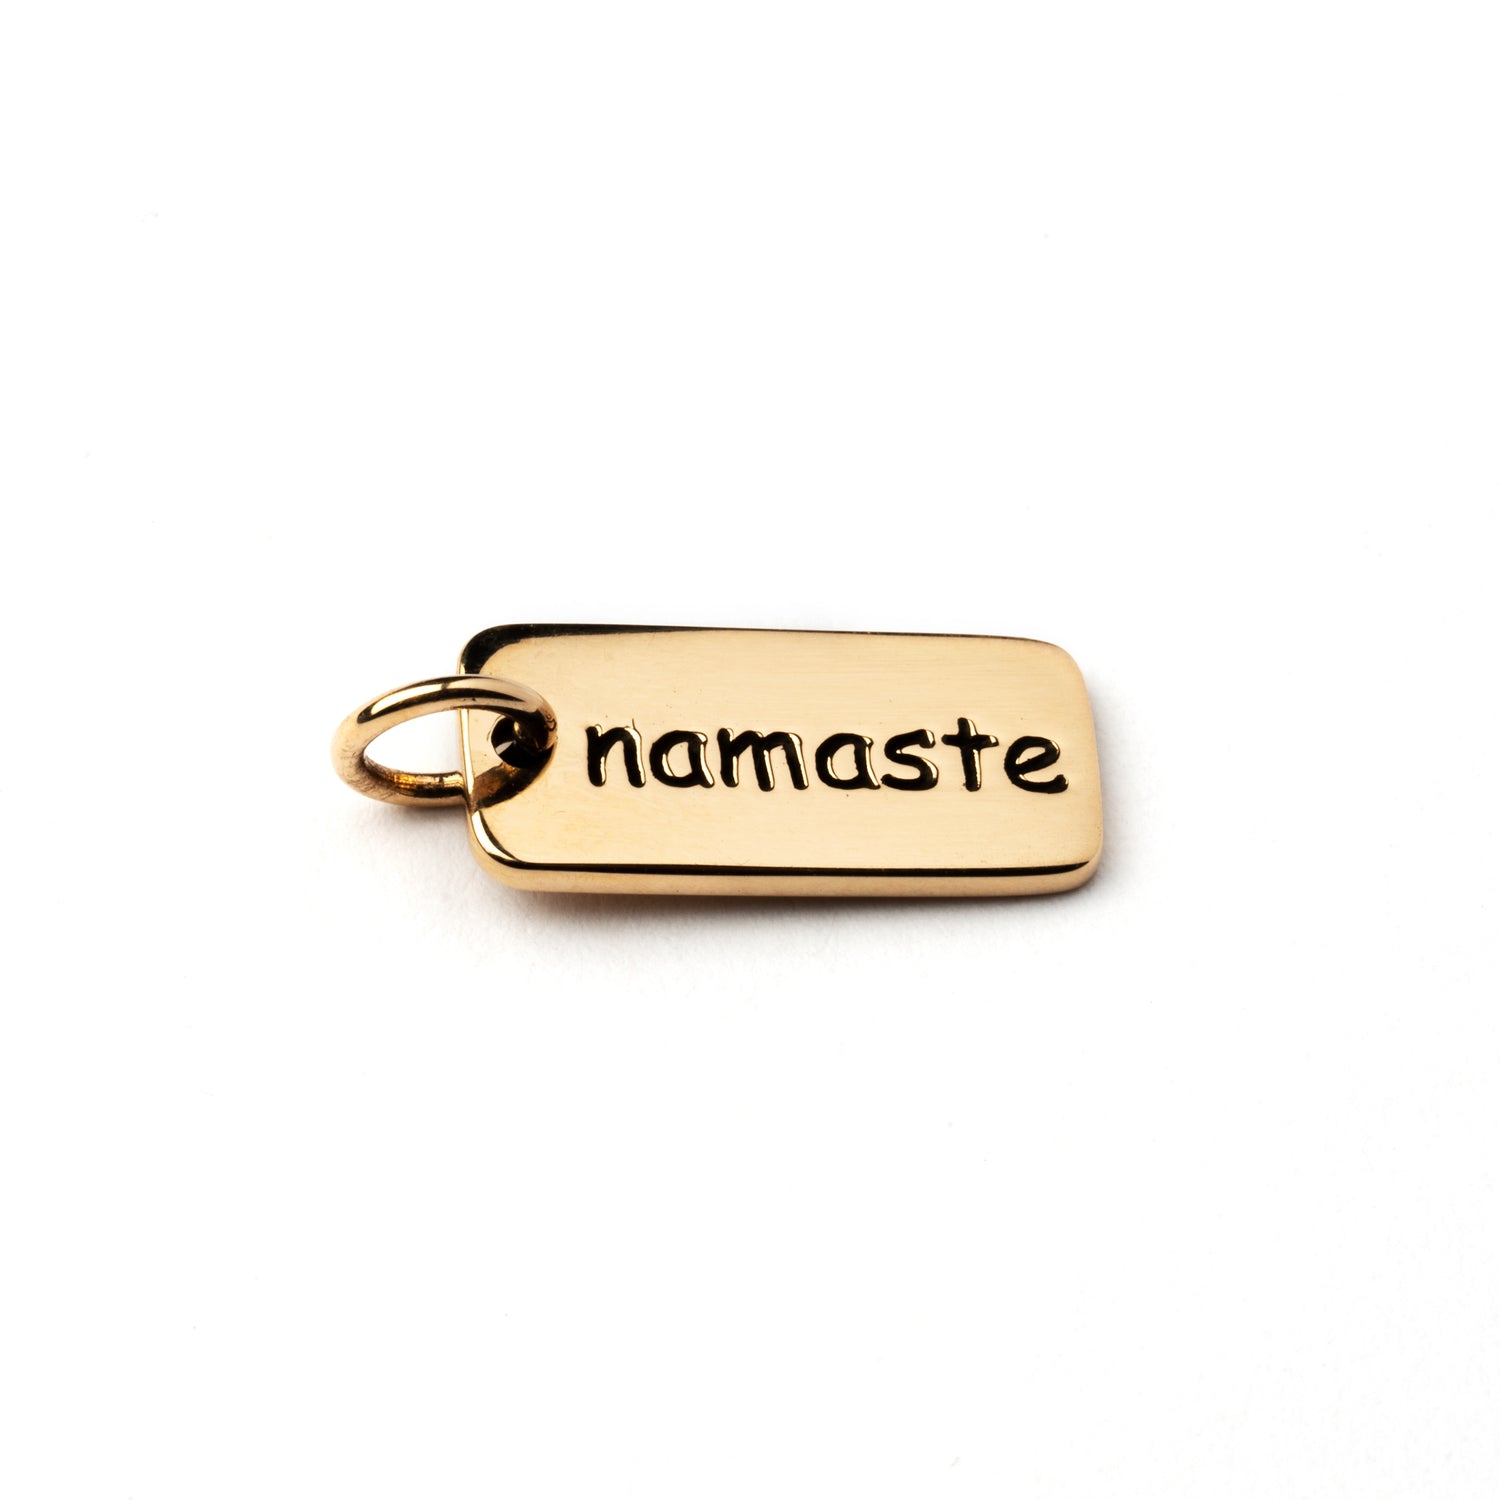 Namaste Charm Necklace frontal view